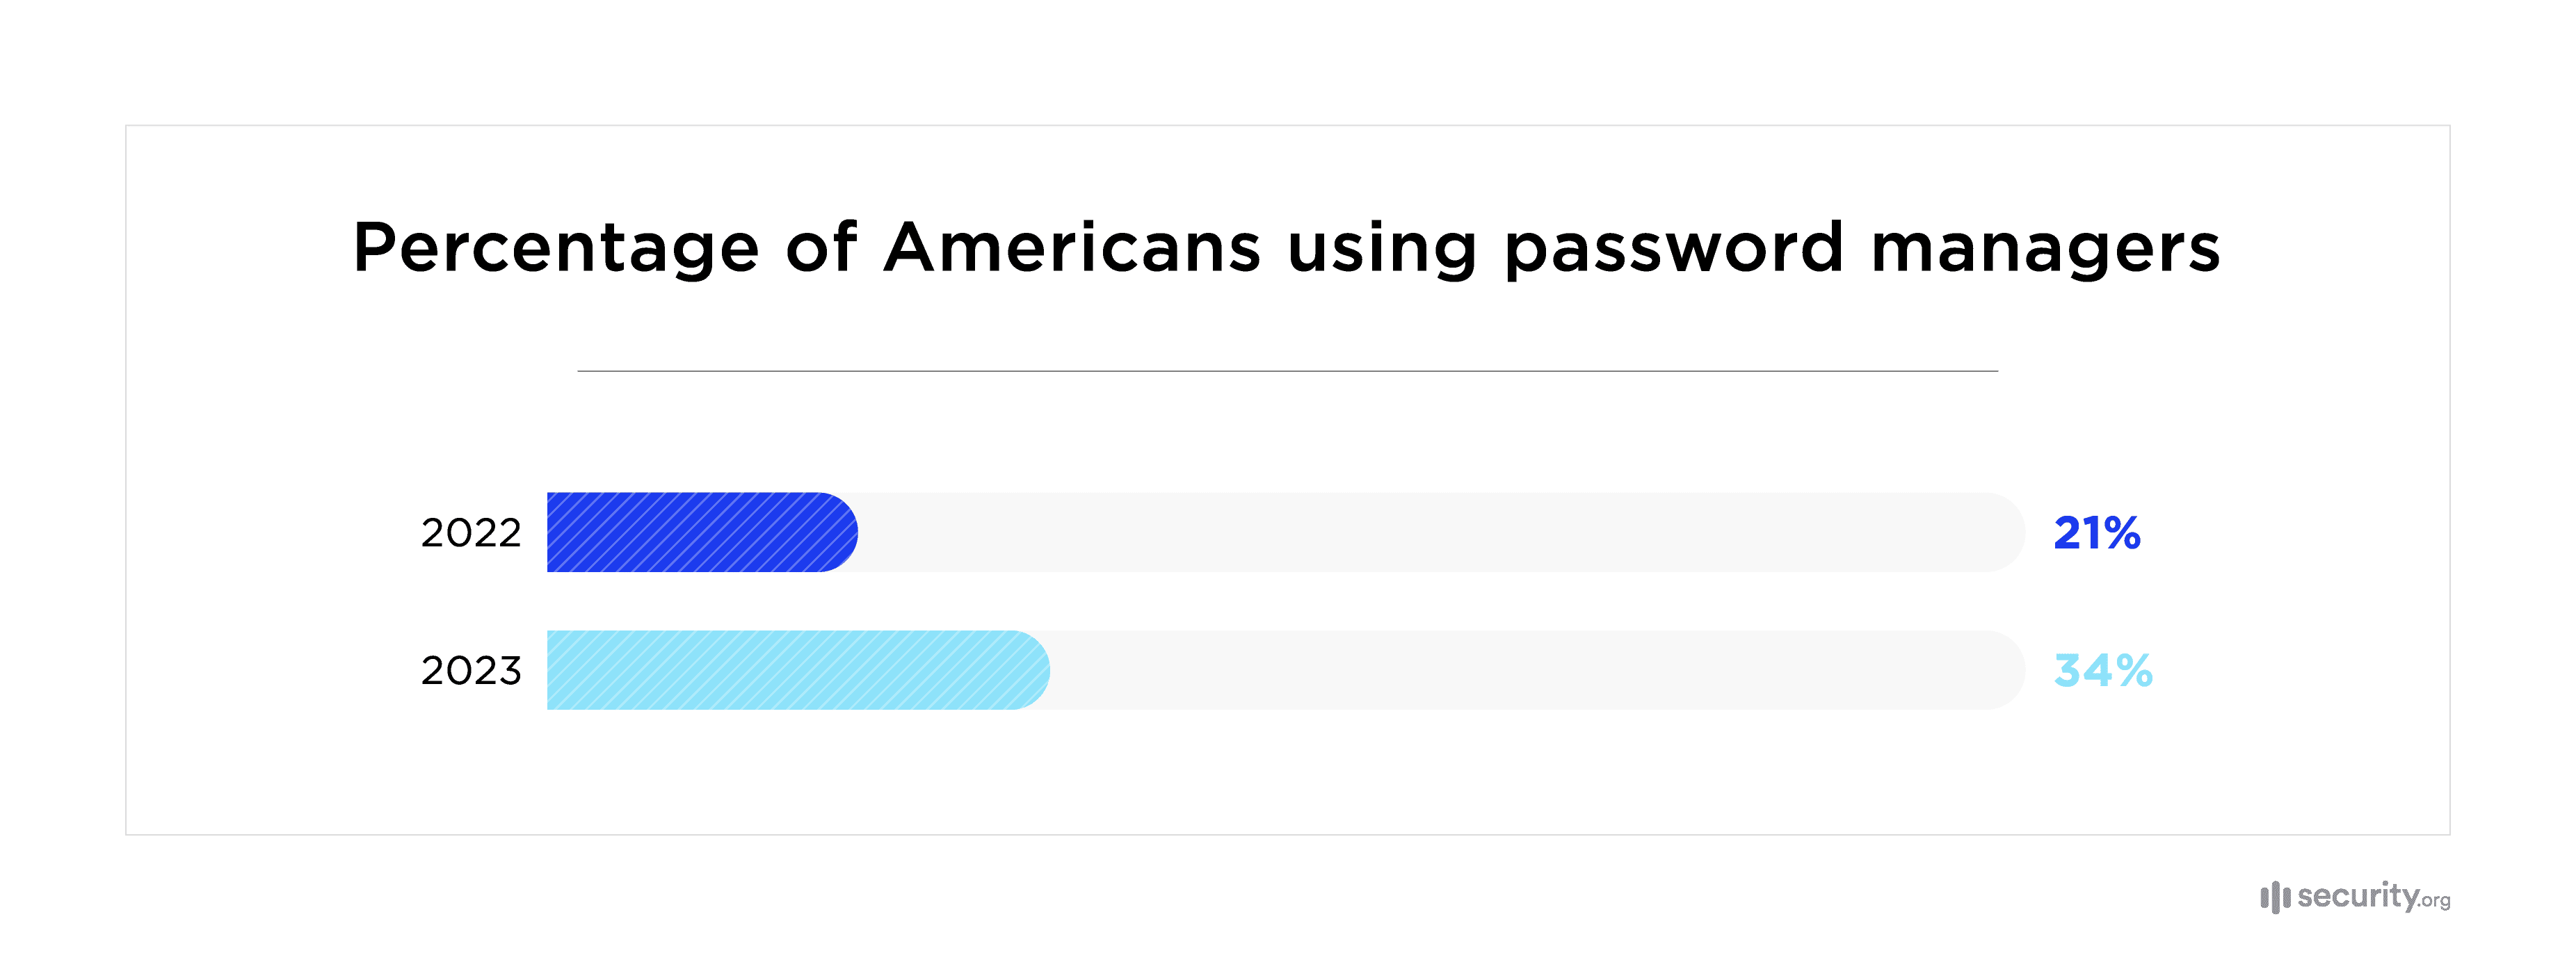 Percentage of Americans using password managers